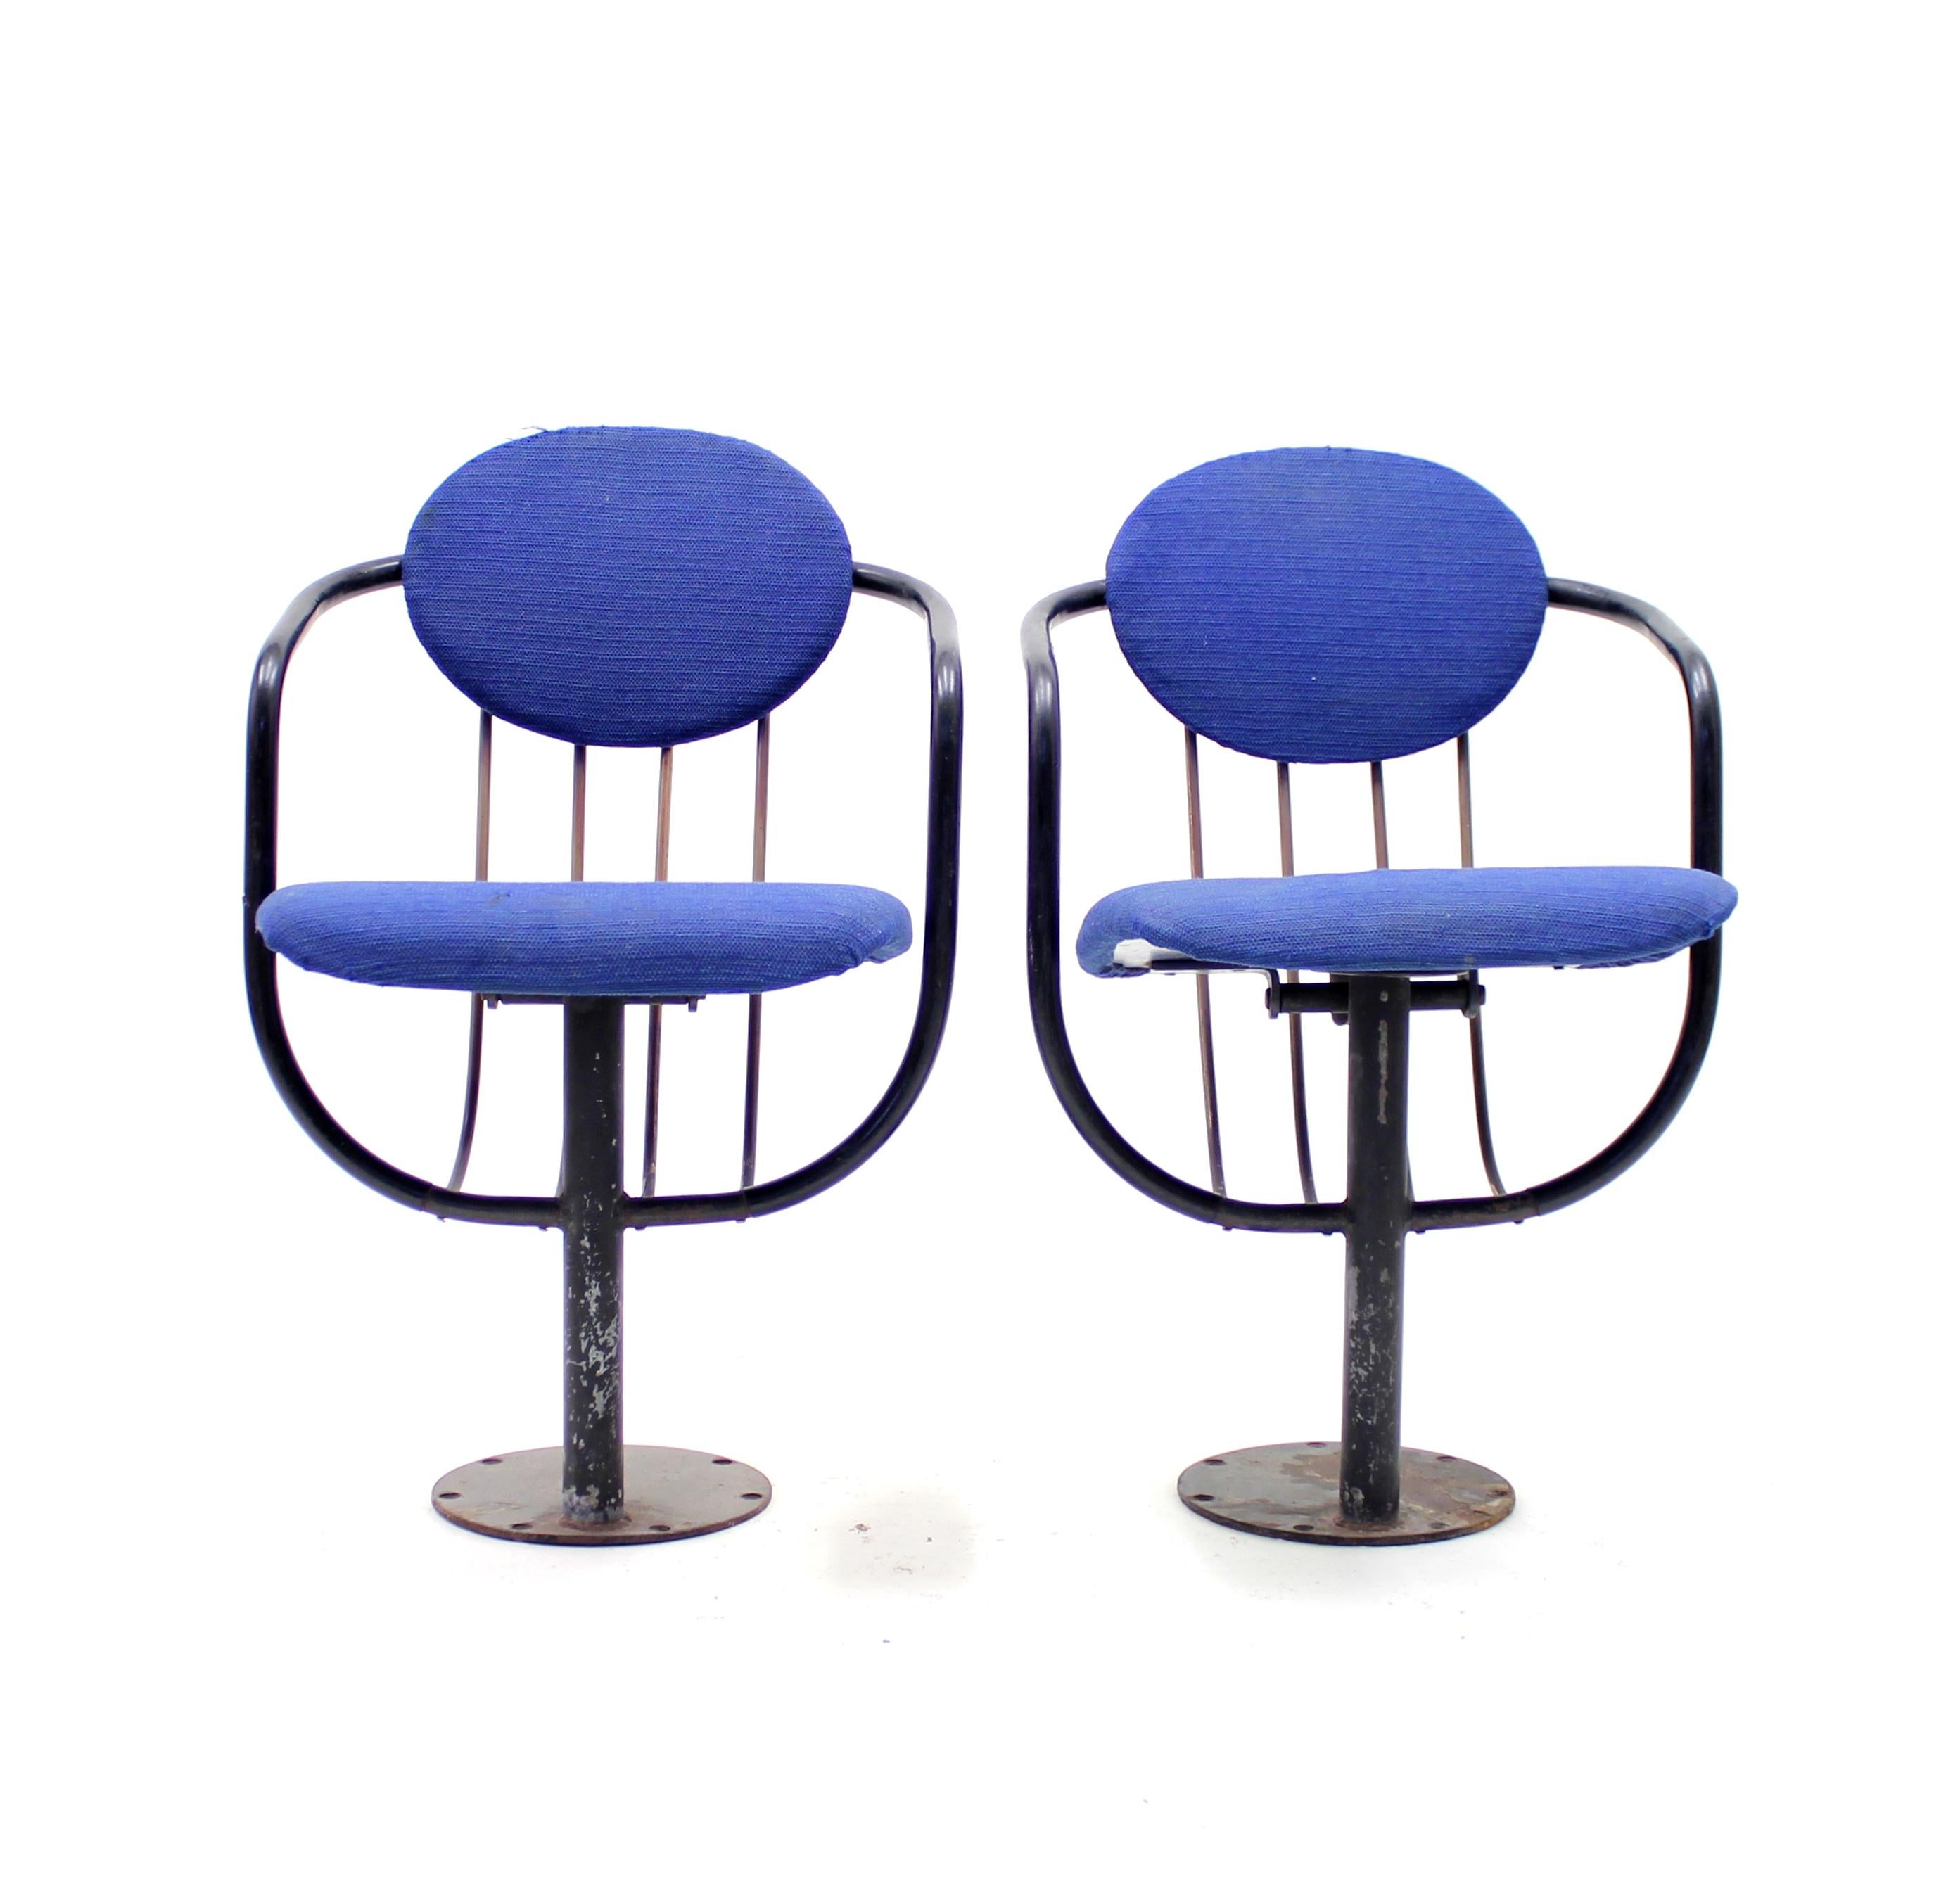 Danish Poul Henningsen, Pair of Foldable Theatre Chairs for the Betty Nansen Theatre, 1 For Sale